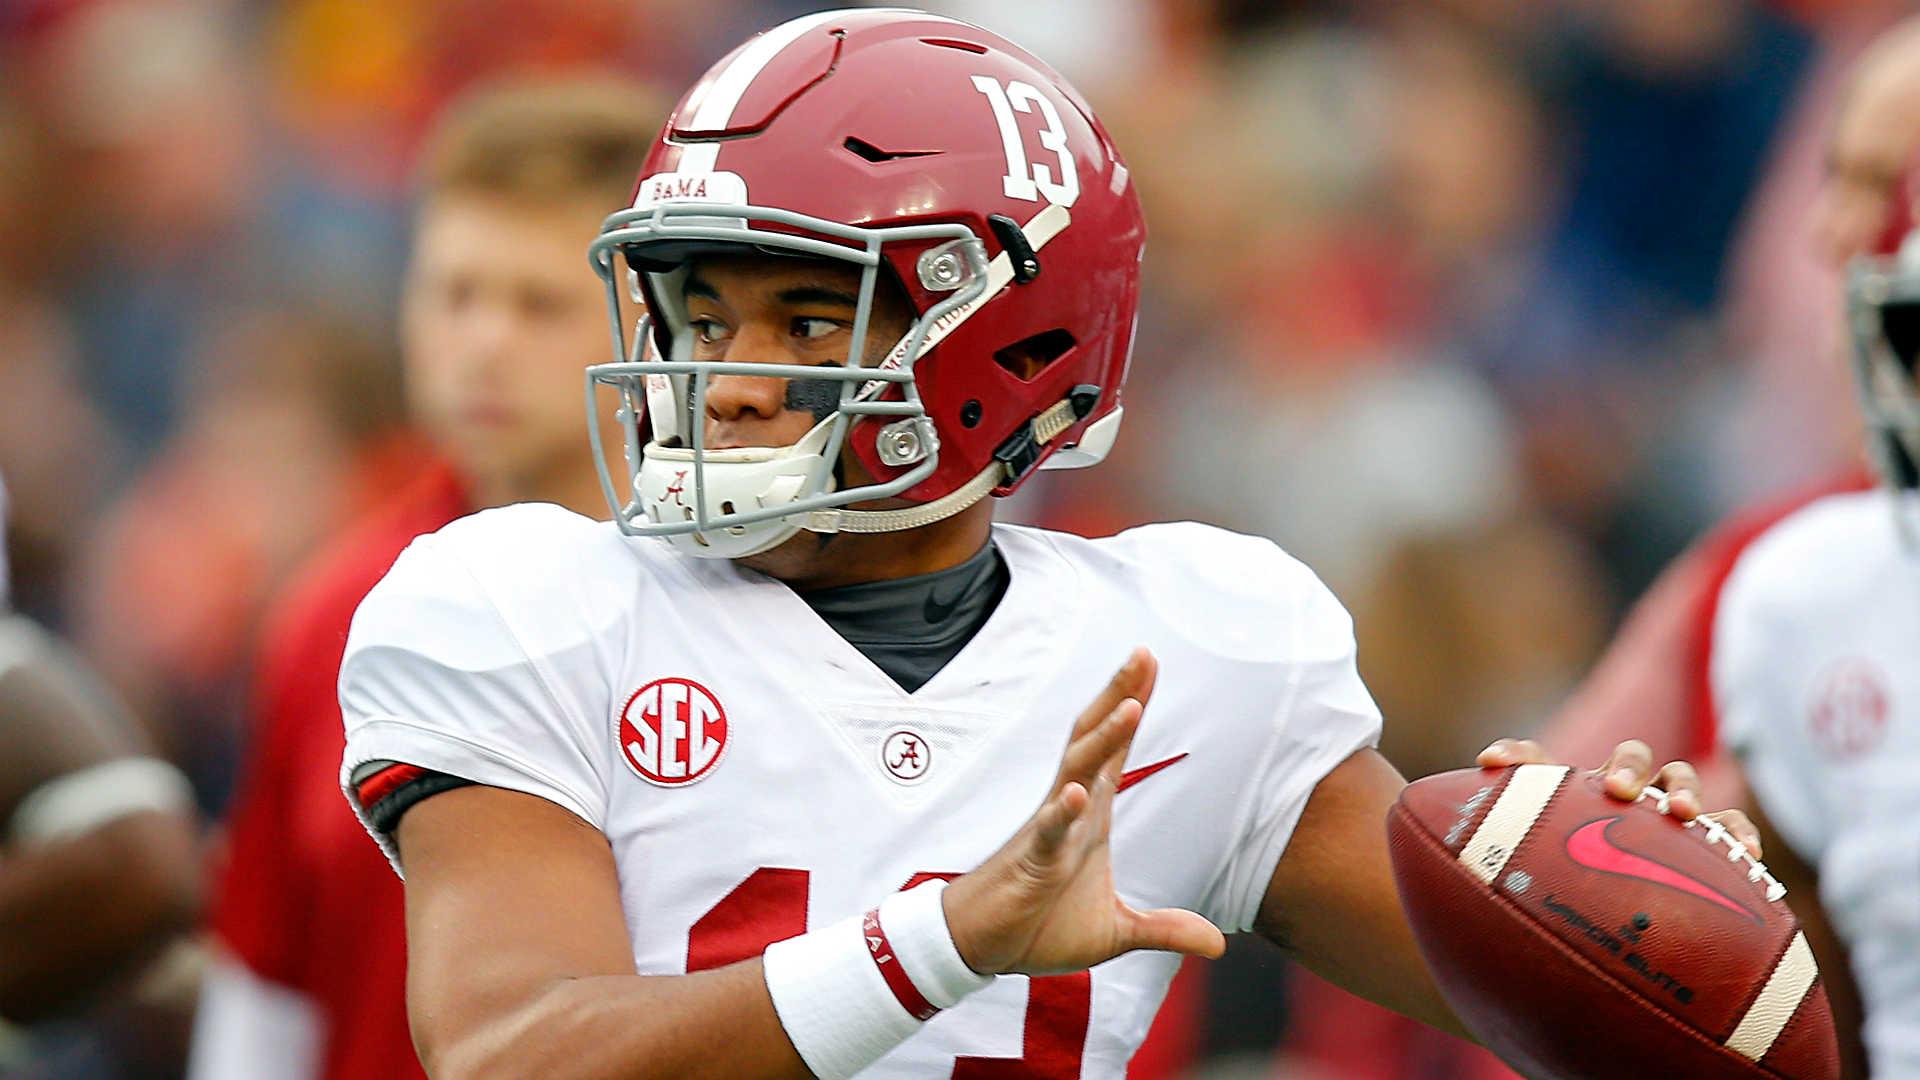 What they're saying about Tua Tagovailoa's game